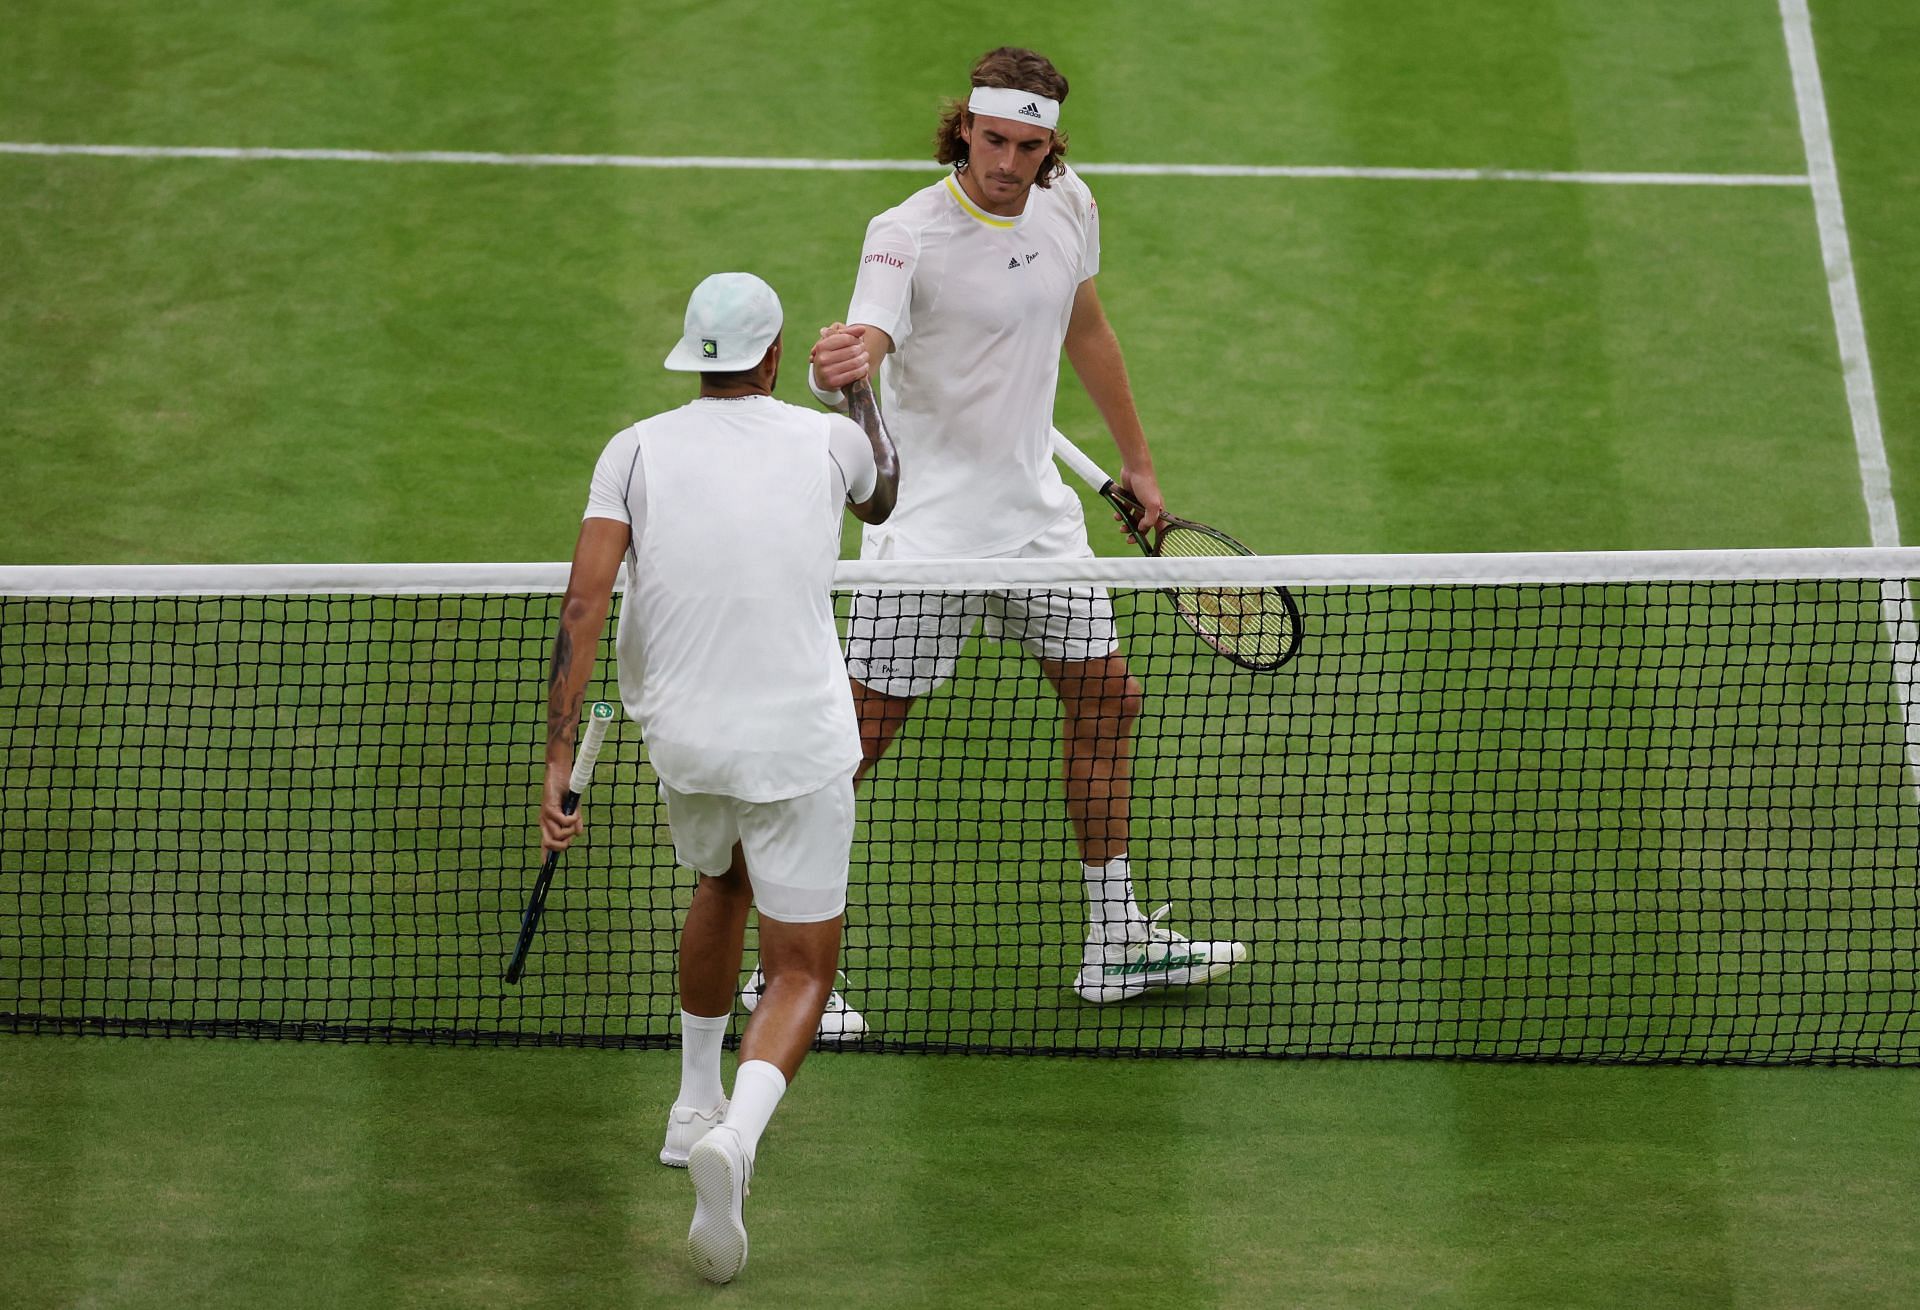 Nick Kyrgios shakes hands with Stefanos Tsitsipas after their third round match in Wimbledon 